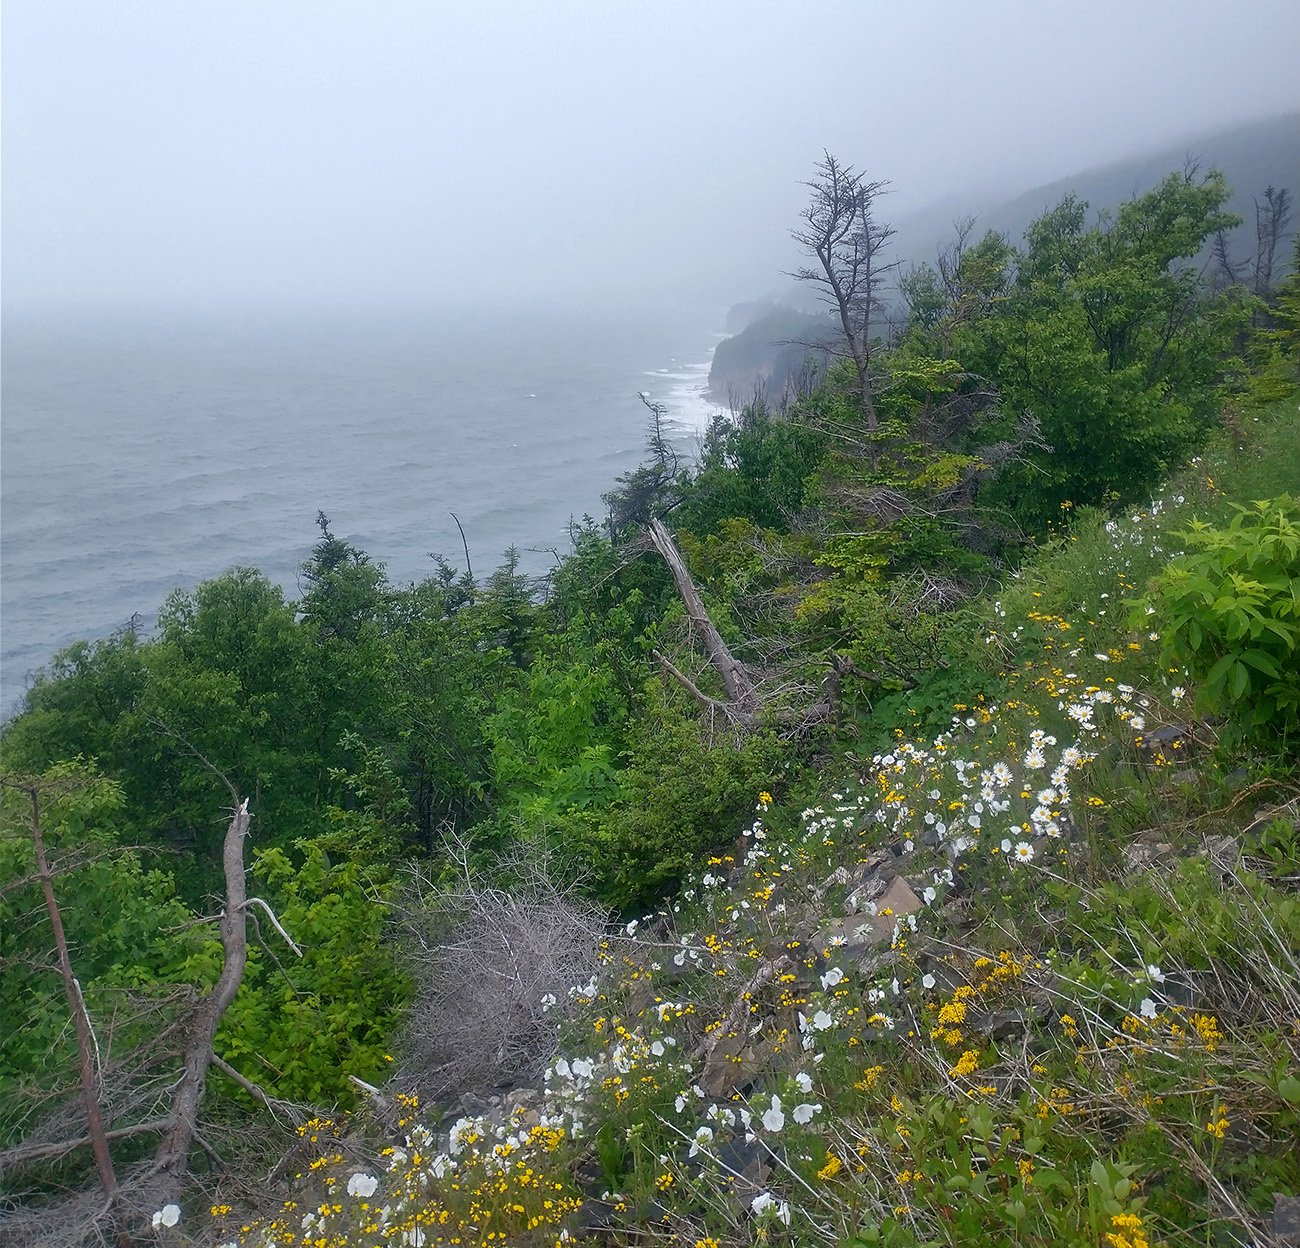 Started to enter a fog patch when climbing up the Cape. Almost anywhere you stop and just walk up to the side of the cliffs you get these amazing views.